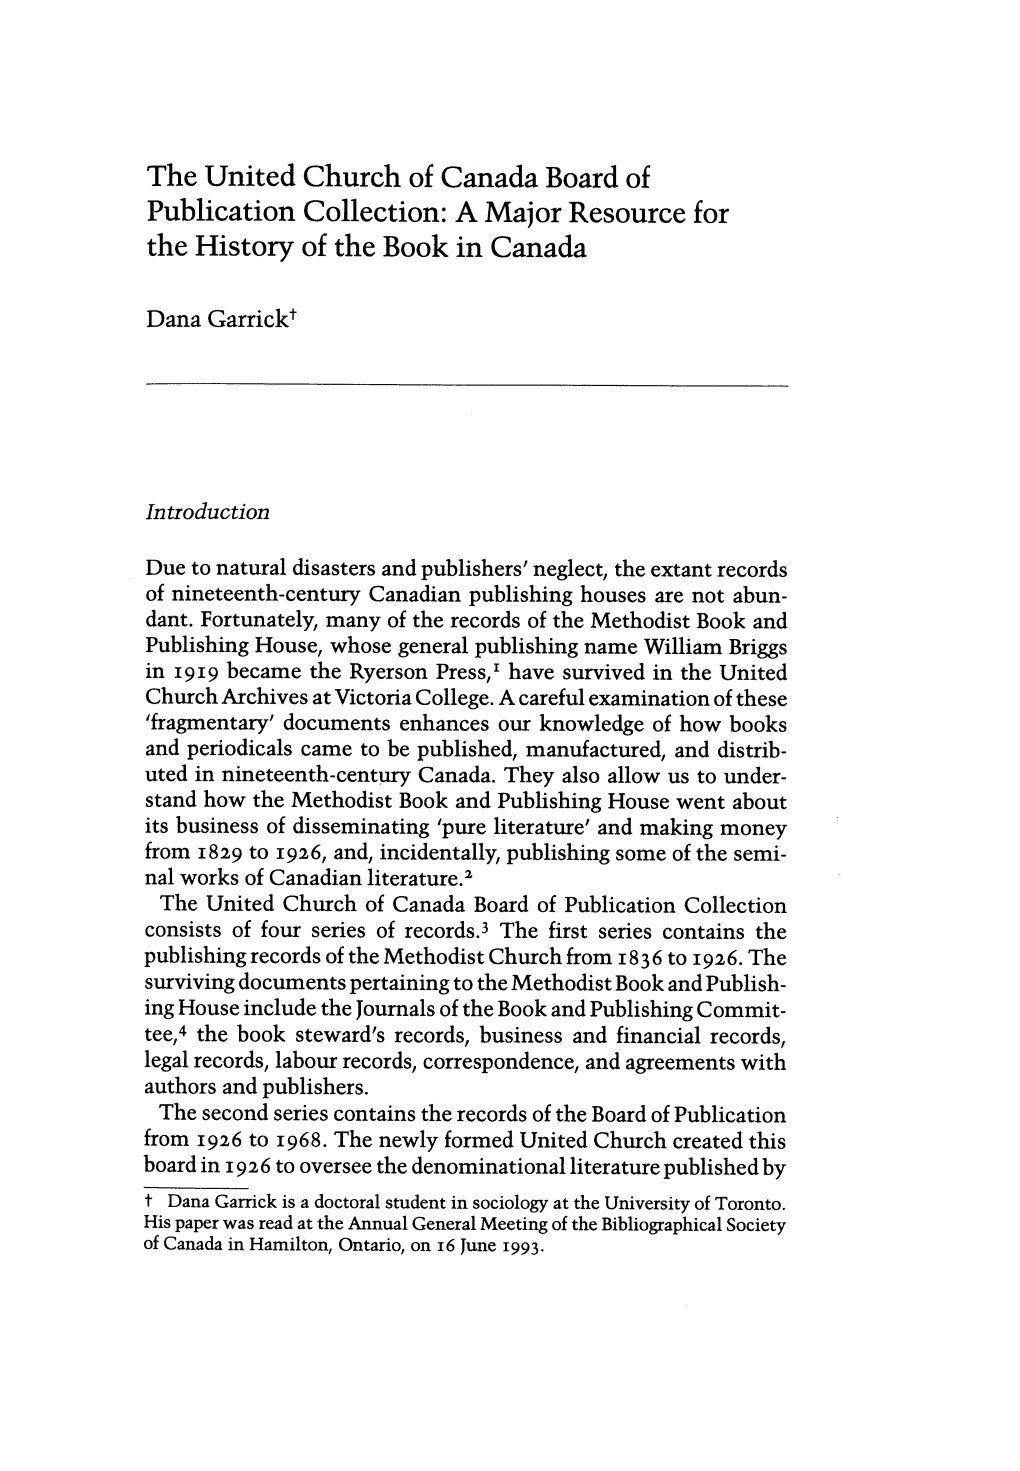 The United Church of Canada Board of Publication Collection: a Major Resource for the History of the Book in Canada